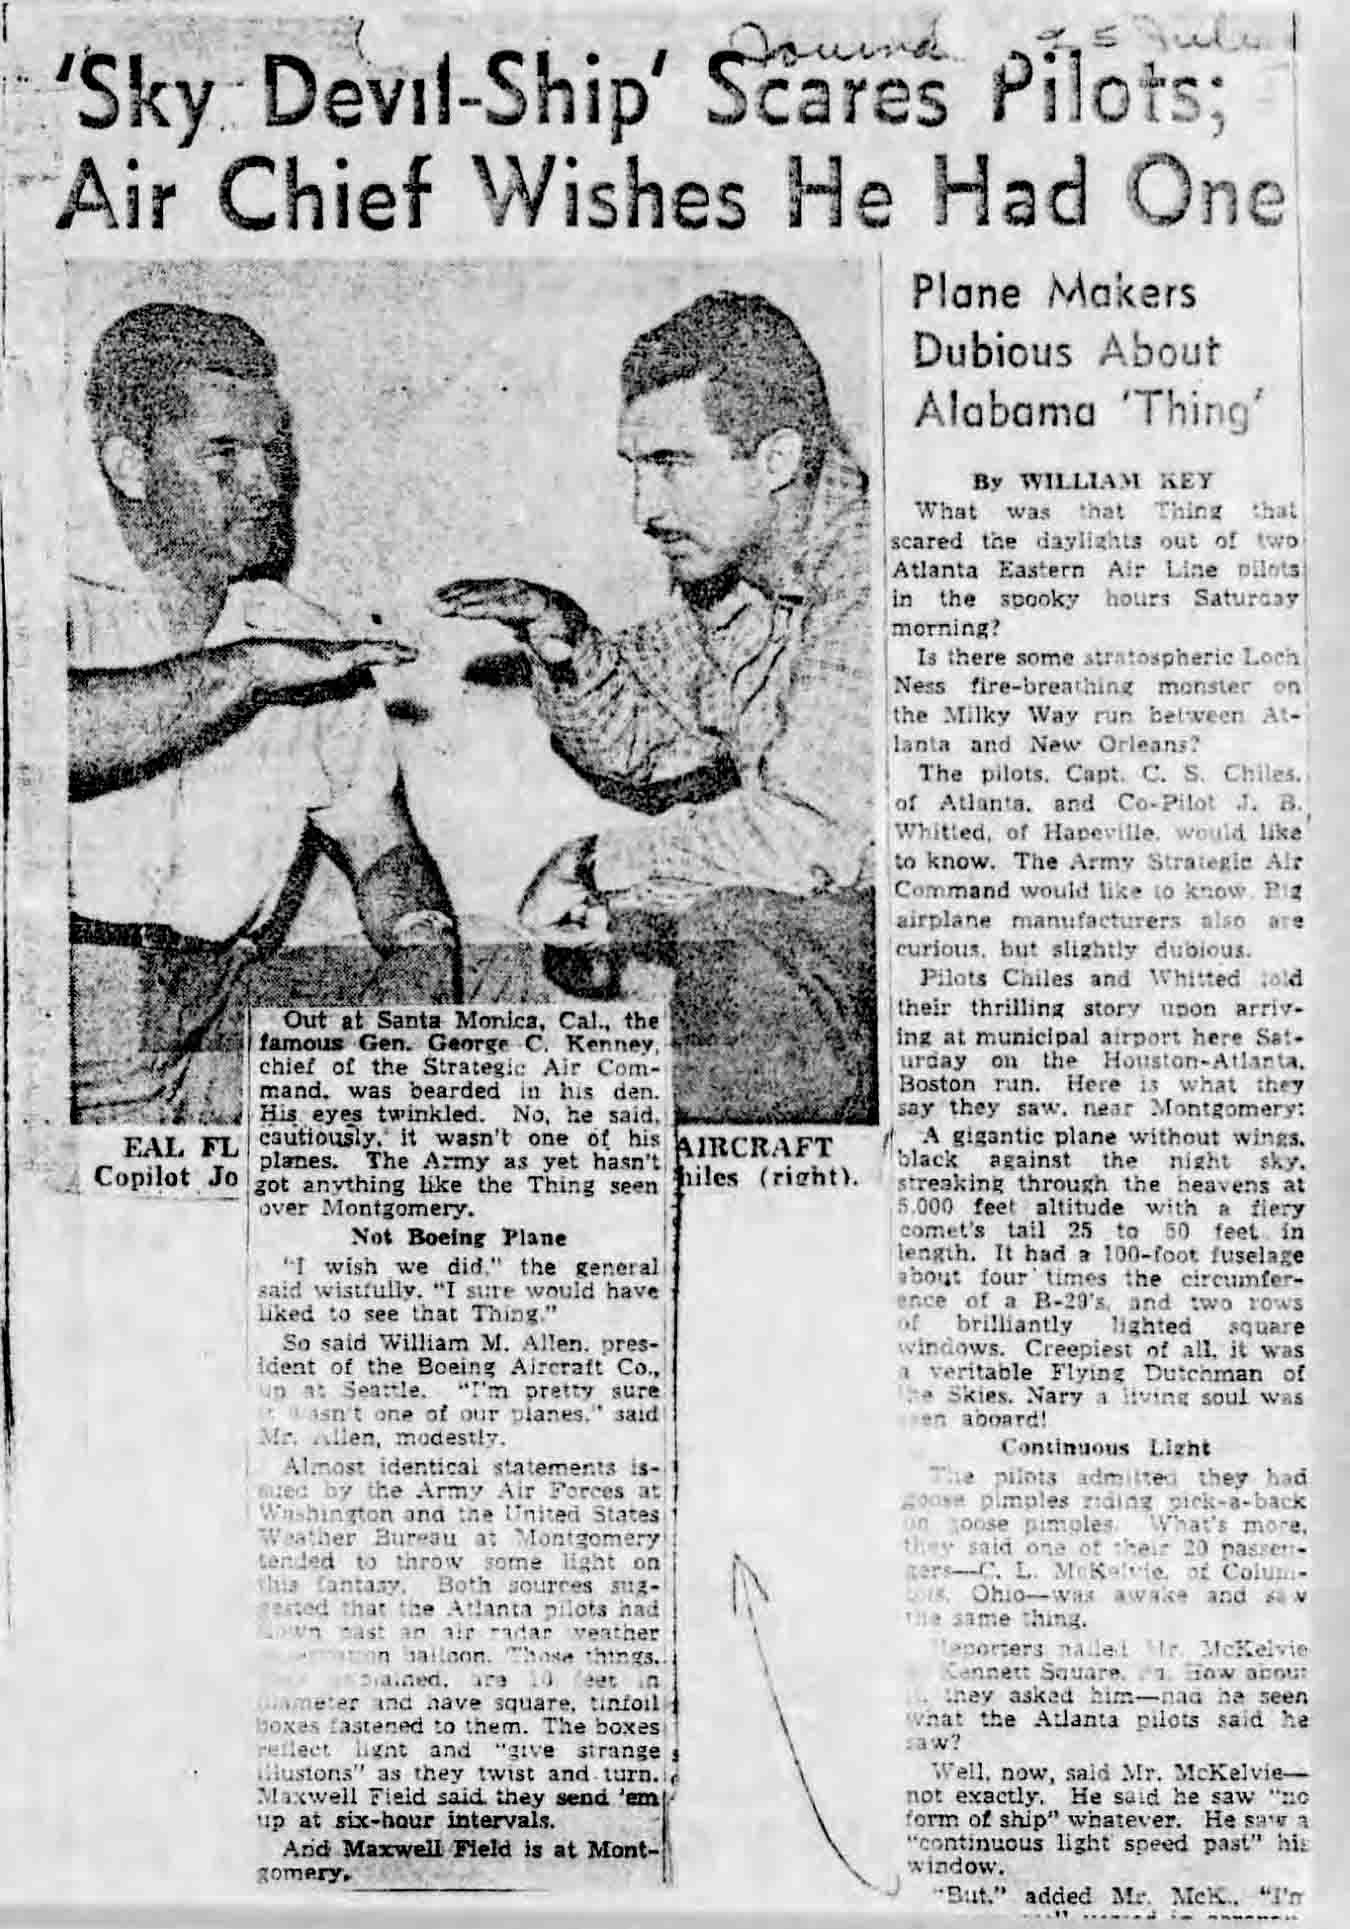 Atlanta Journal article about the Chiles-Whitted UFO encounter.